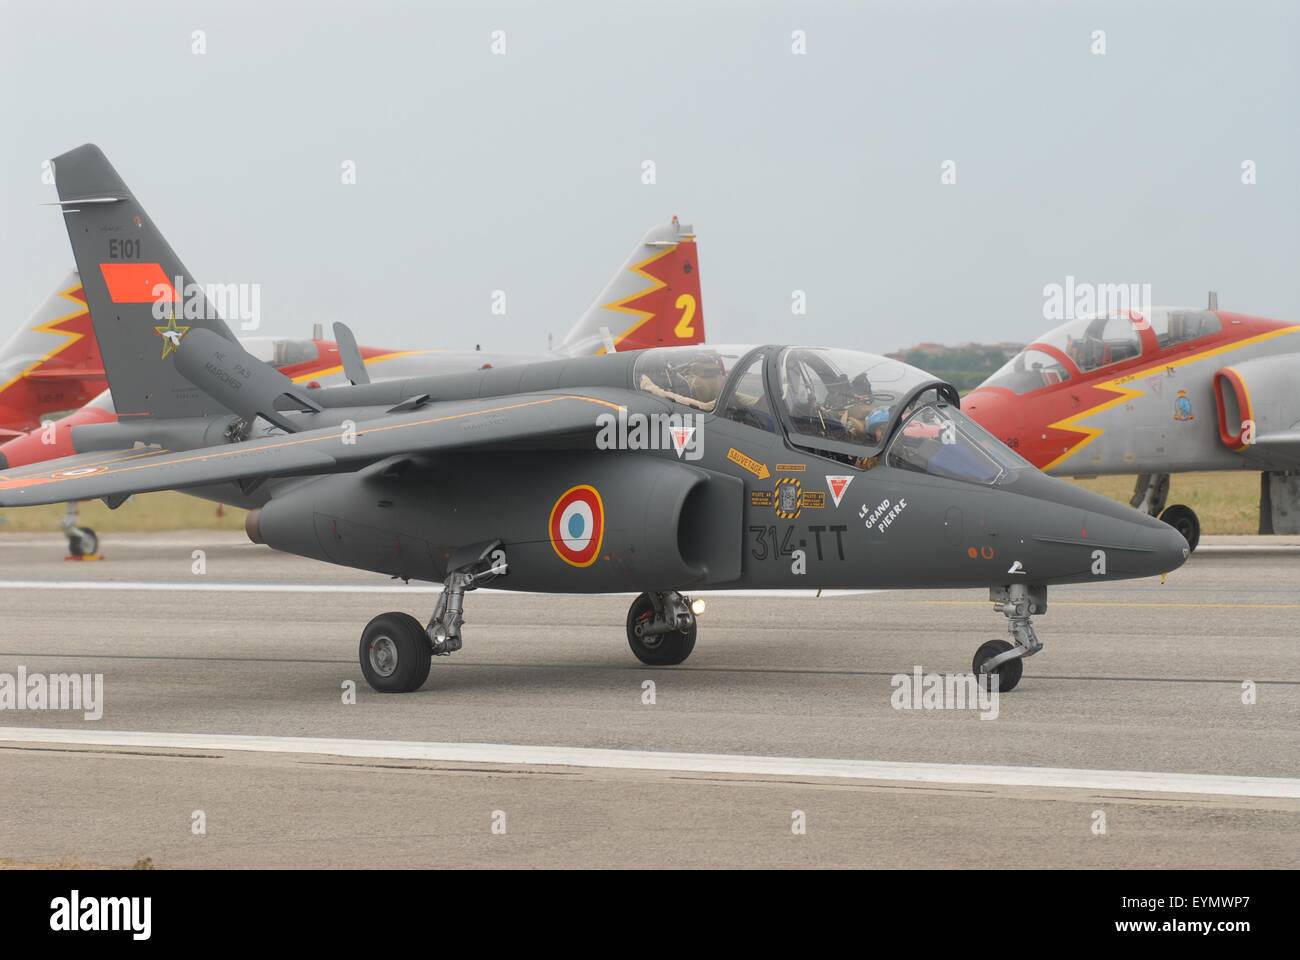 French Air Force (Armée de l'Air), Alpha Jet light-attack and advanced trainer aircraft Stock Photo